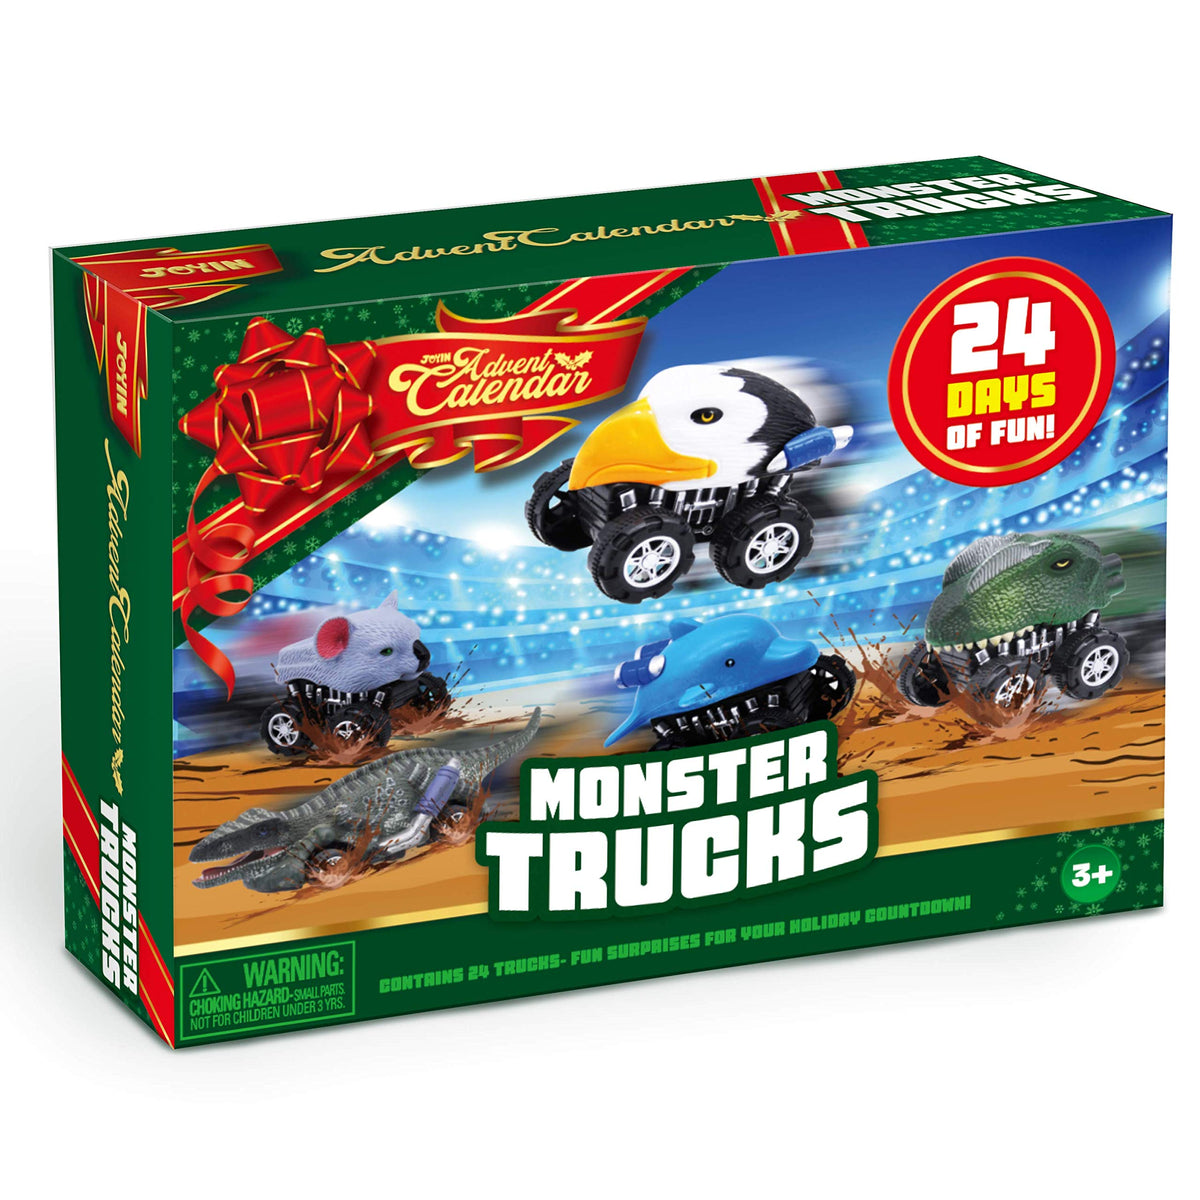 https://www.joyinusa.shop/wp-content/uploads/1692/00/visit-our-website-to-see-the-newest-the-christmas-advent-calendar-with-monster-truck-toys-set-joyin-unique-designs-that-you-cant-find-in-any-other-place_5.jpg